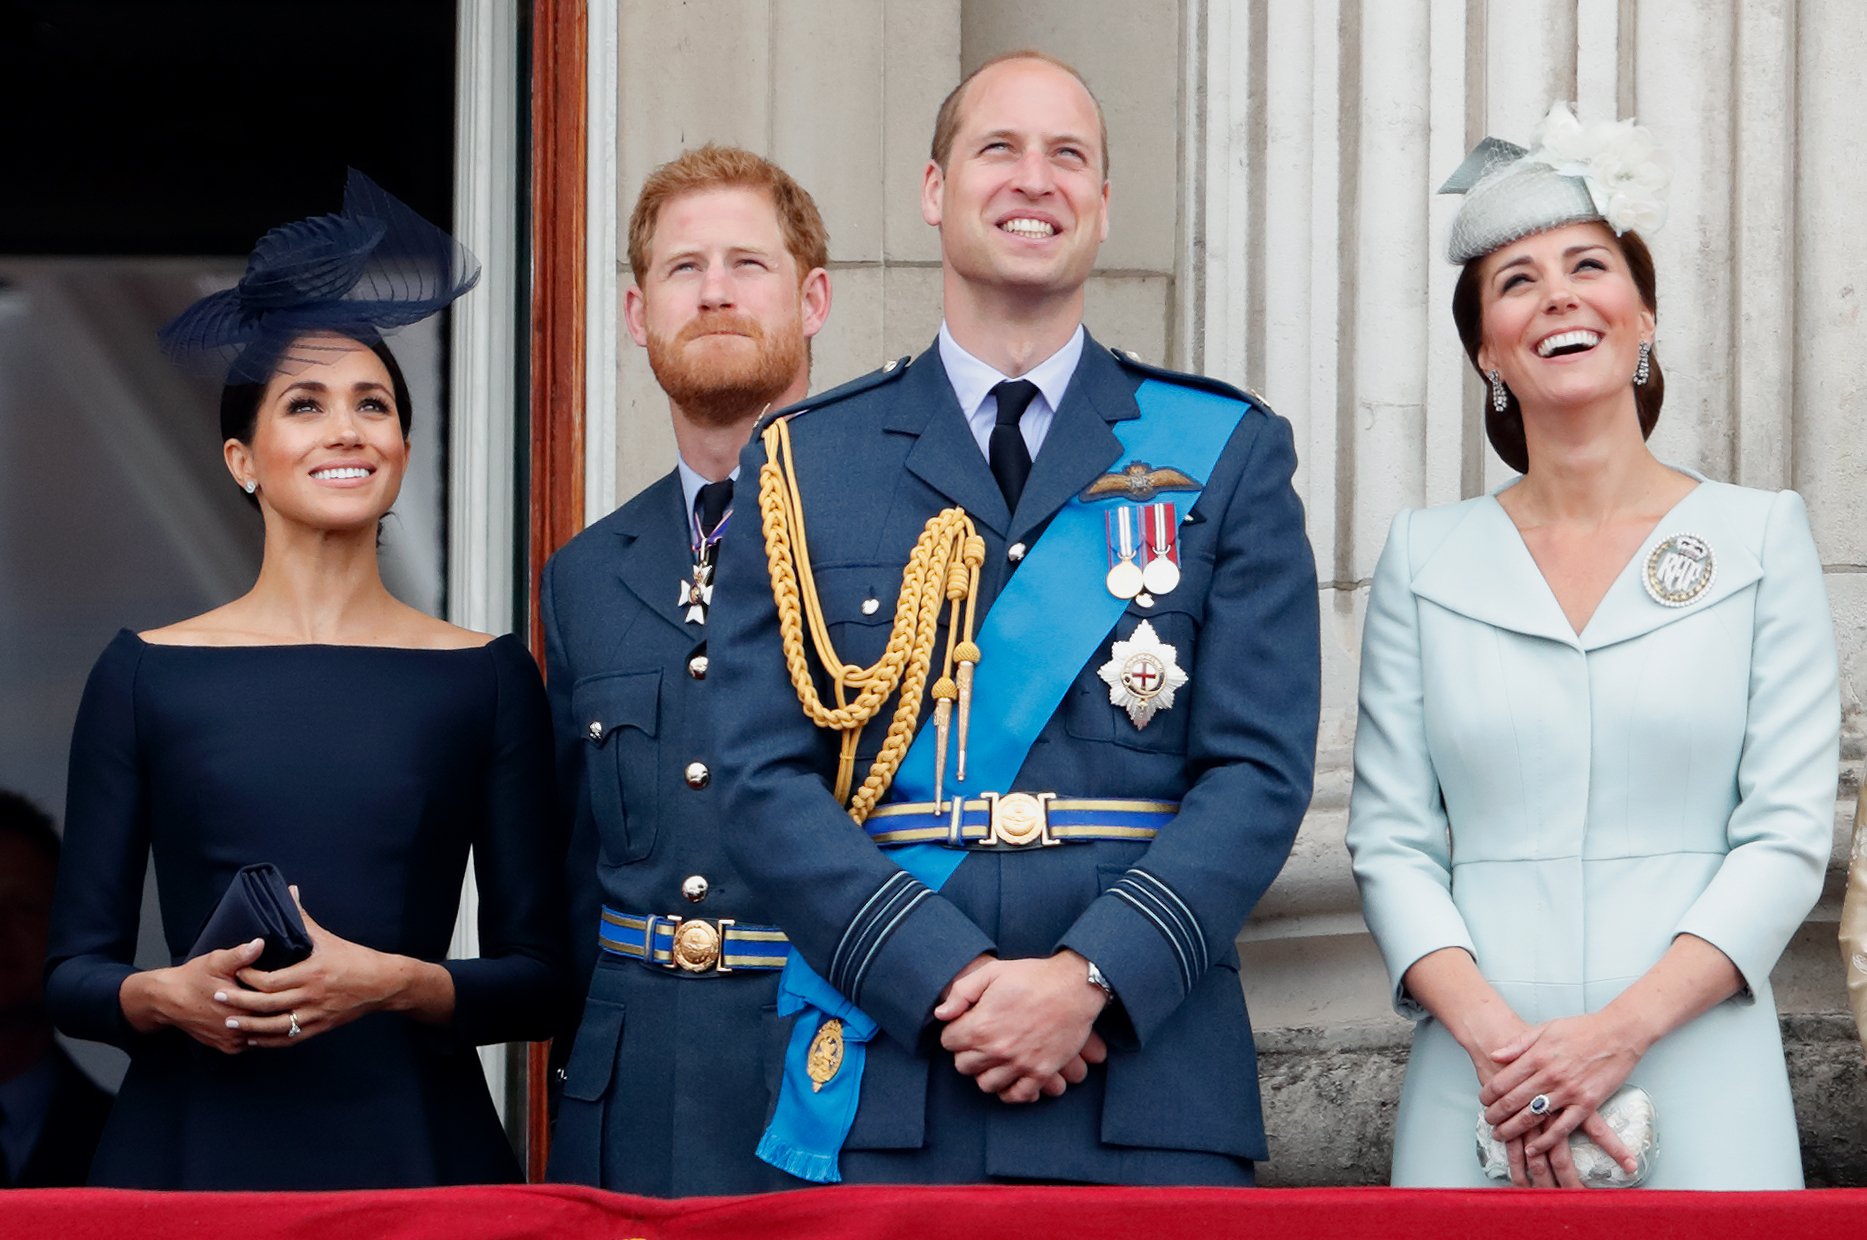 Duchess Meghan, Prince Harry, Prince William, and Duchess Kate marking the centenary of the Royal Air Force from the balcony of Buckingham Palace on July 10, 2018, in London, England. | Source: Max Mumby/Indigo/Getty Images